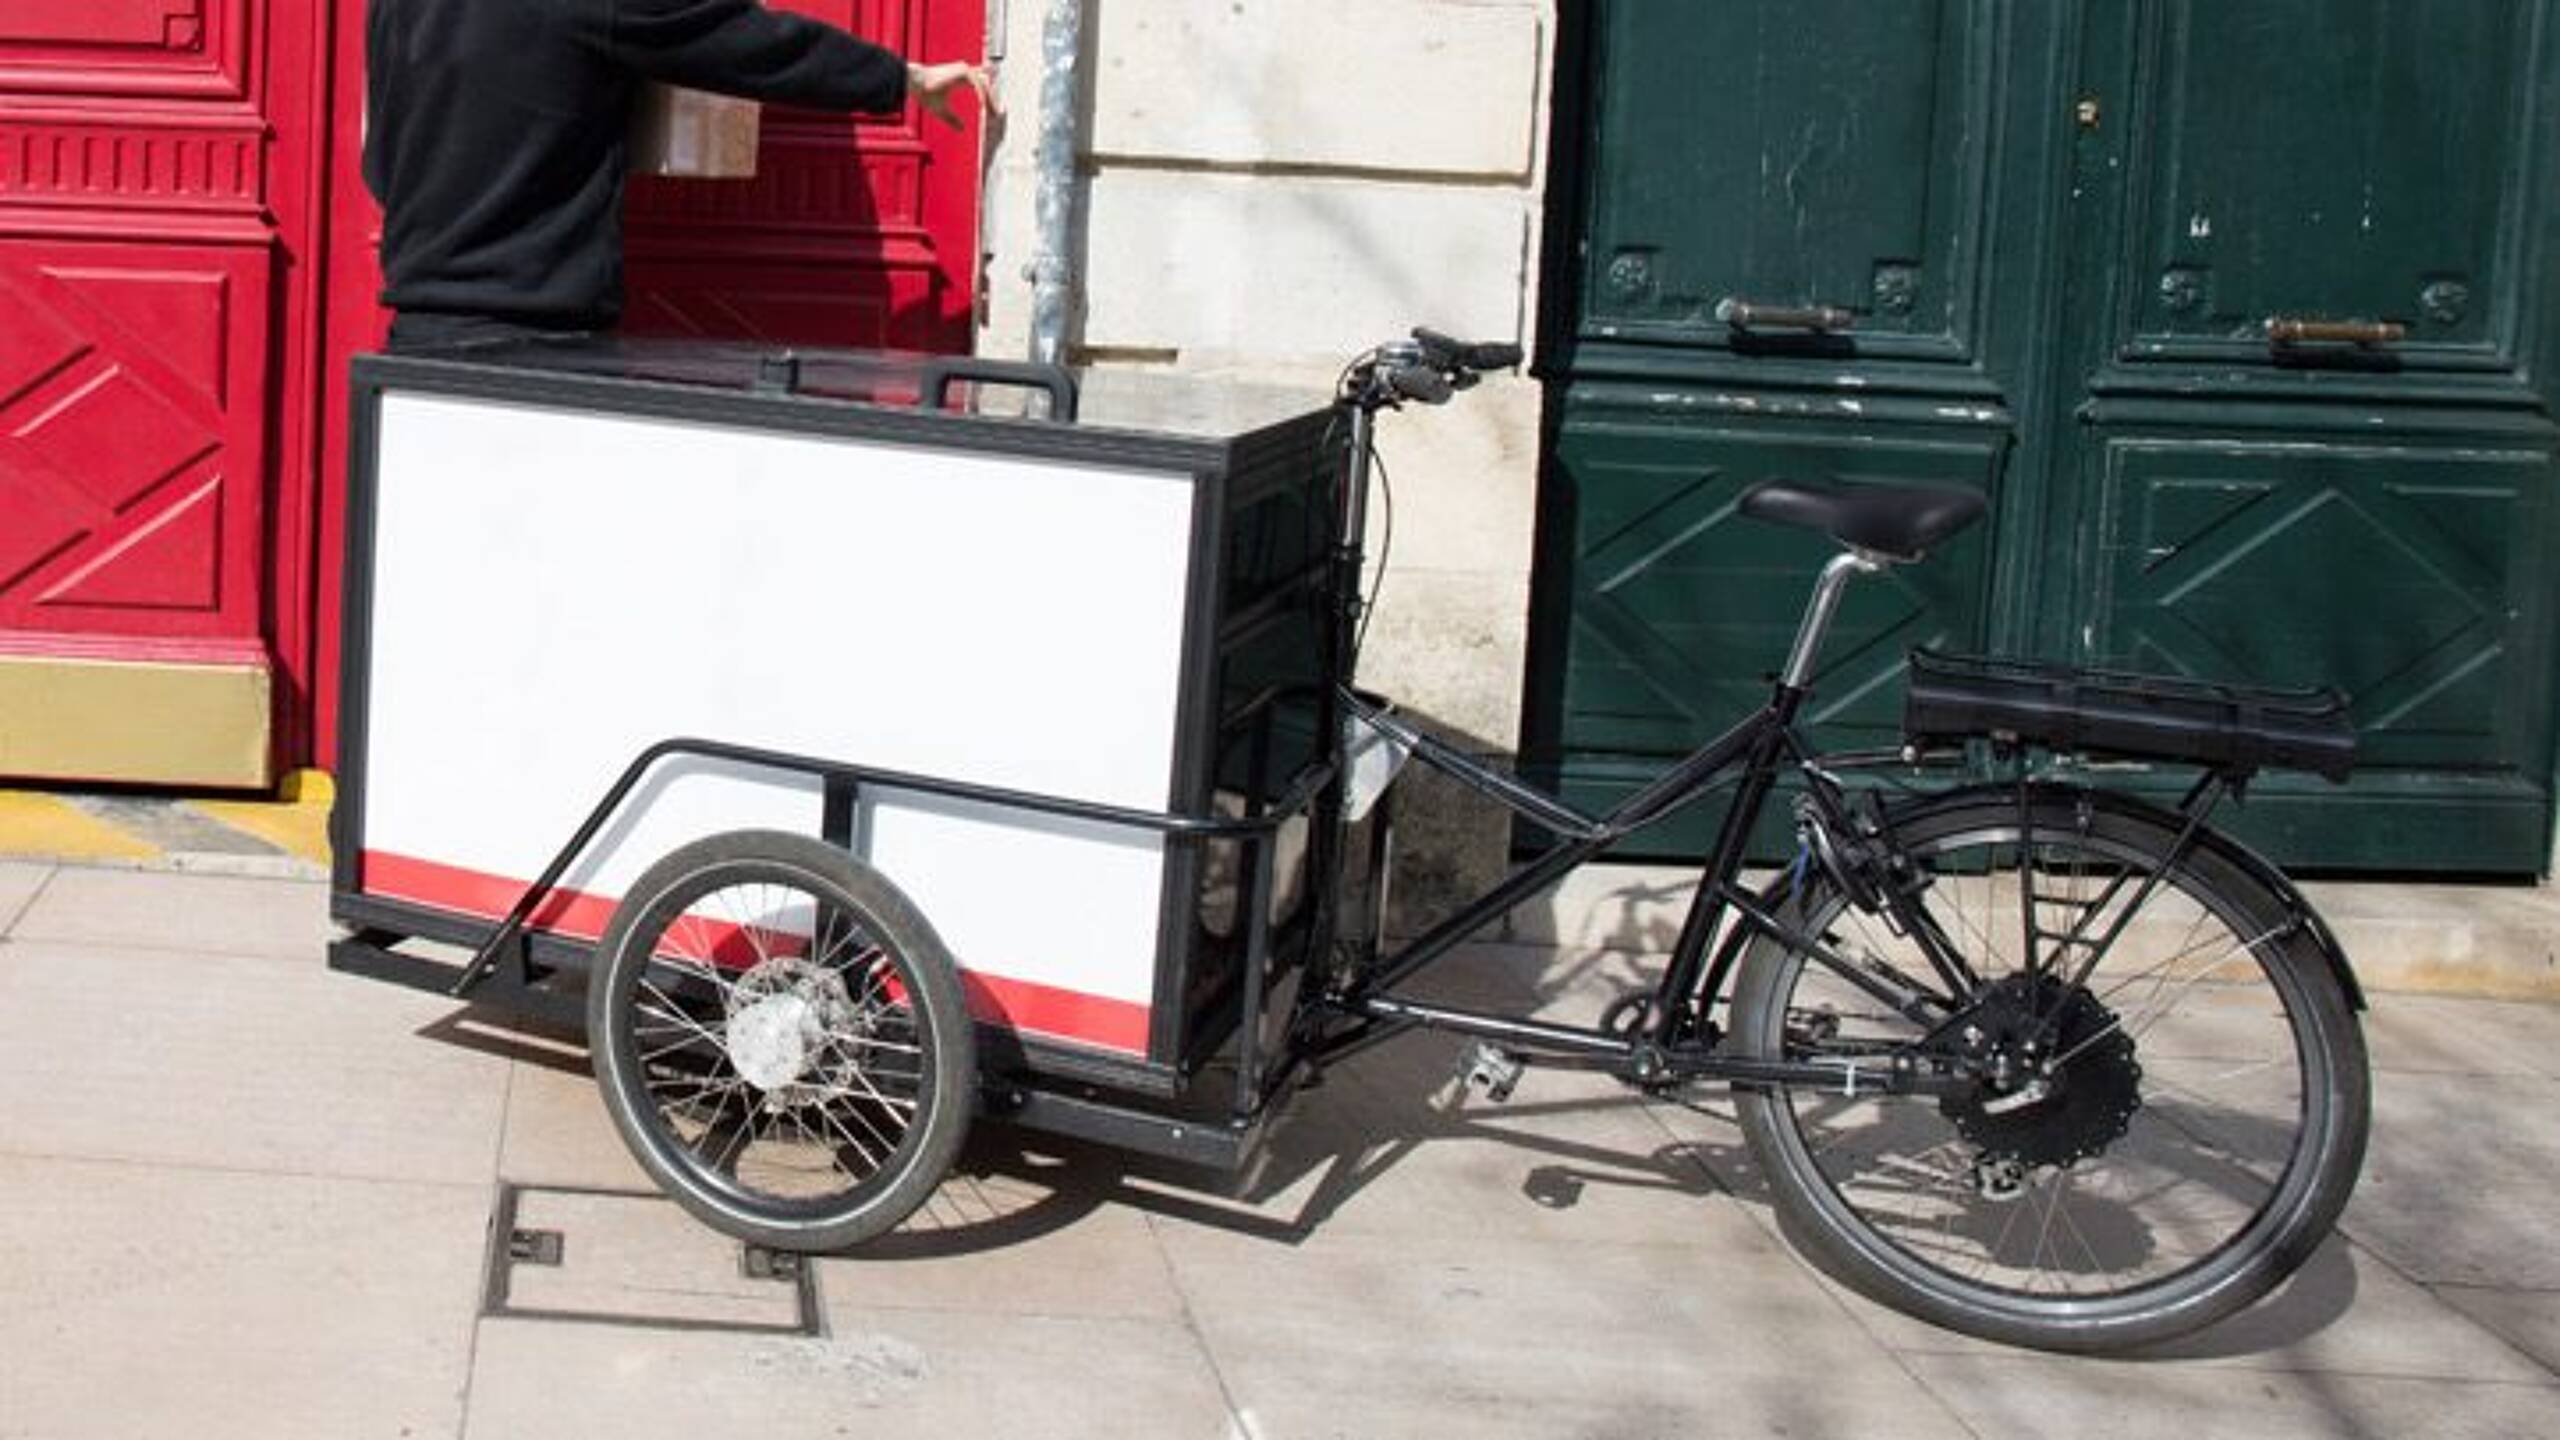 London businesses turn to cargo bikes ahead of Ultra Low Emission Zone